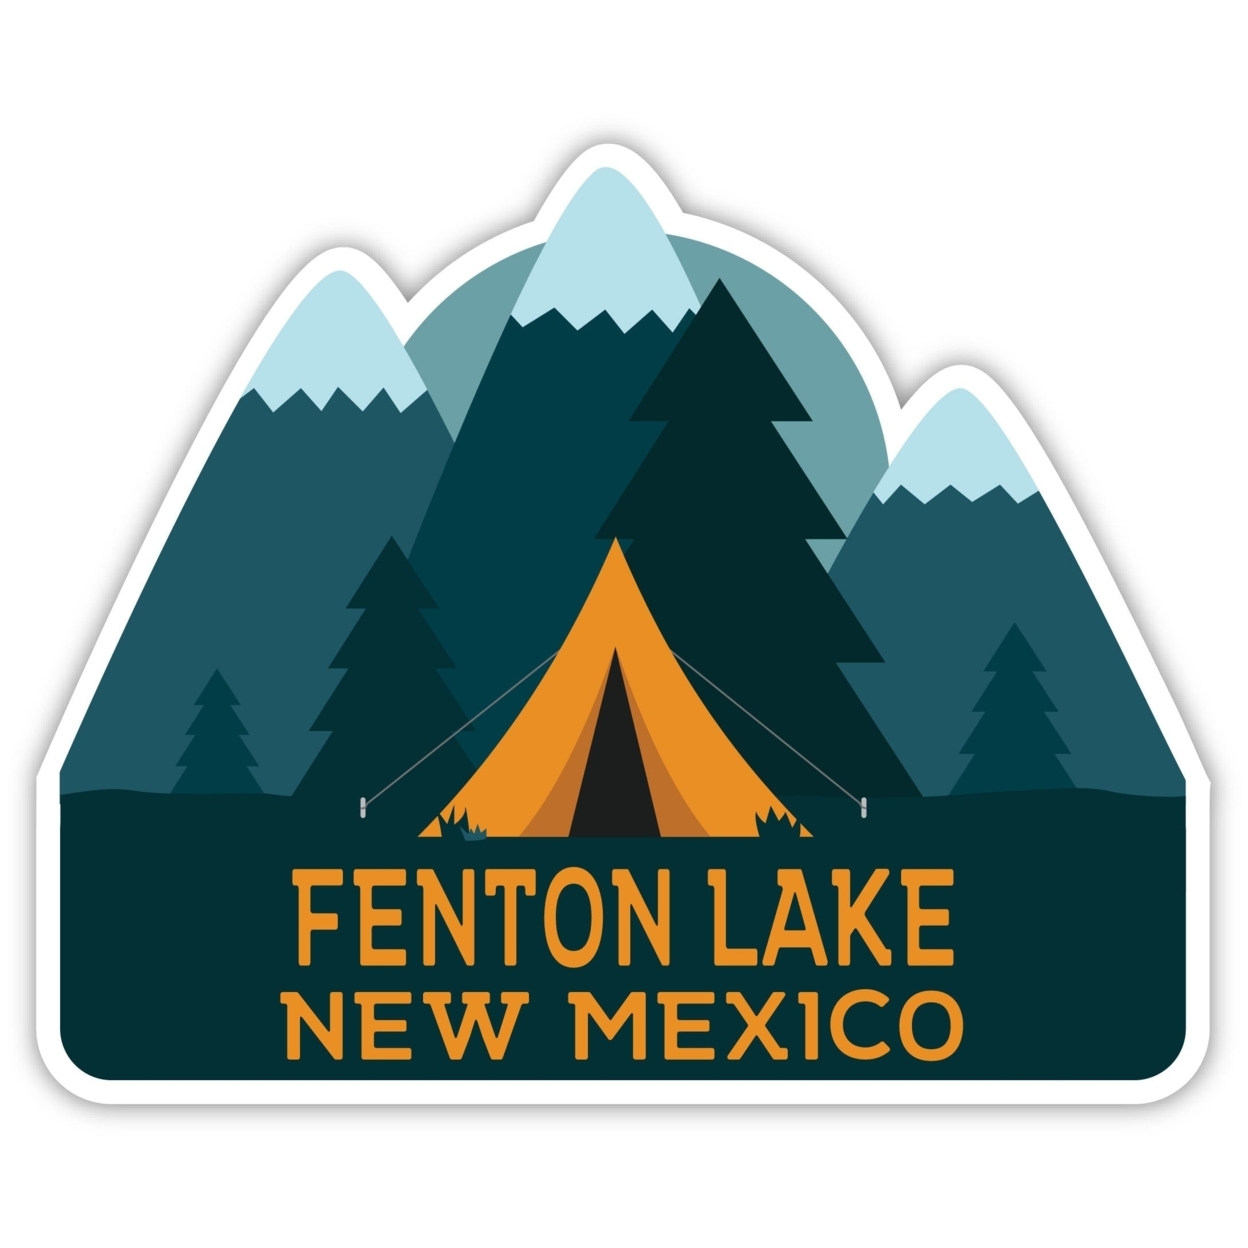 Fenton Lake New Mexico Souvenir Decorative Stickers (Choose Theme And Size) - 4-Pack, 4-Inch, Tent